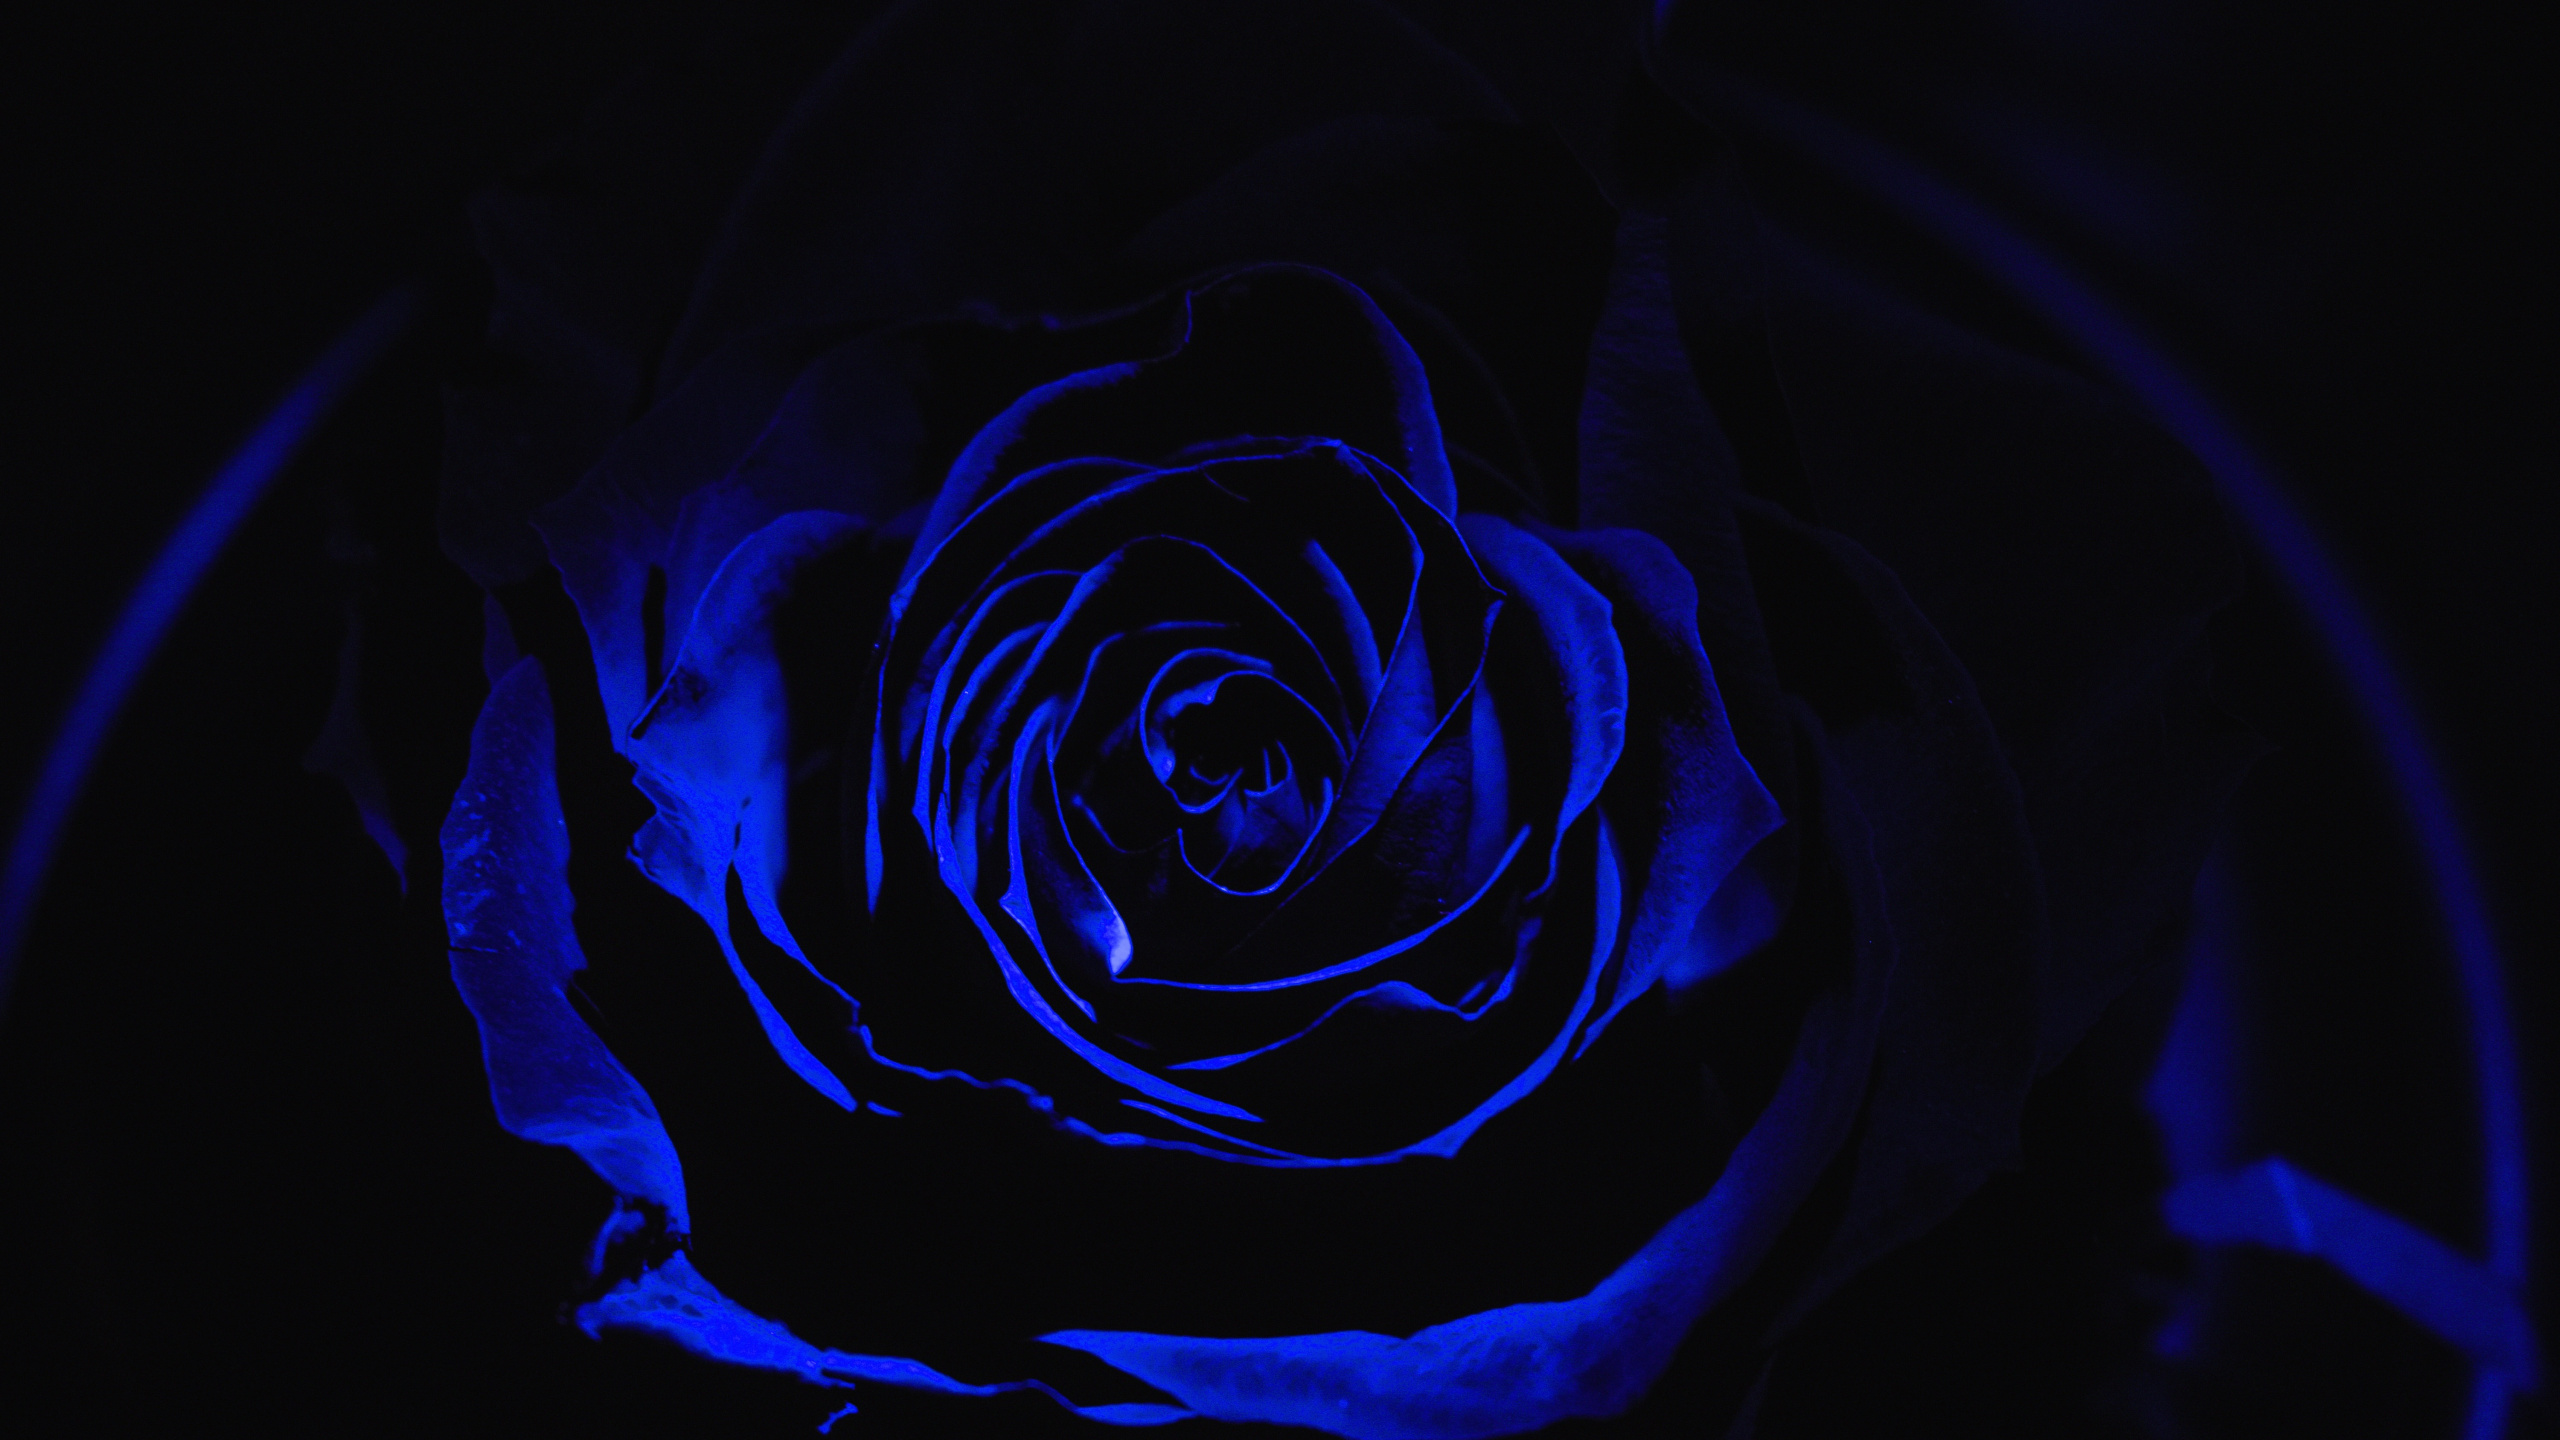 Blue Rose in Close up Photography. Wallpaper in 2560x1440 Resolution